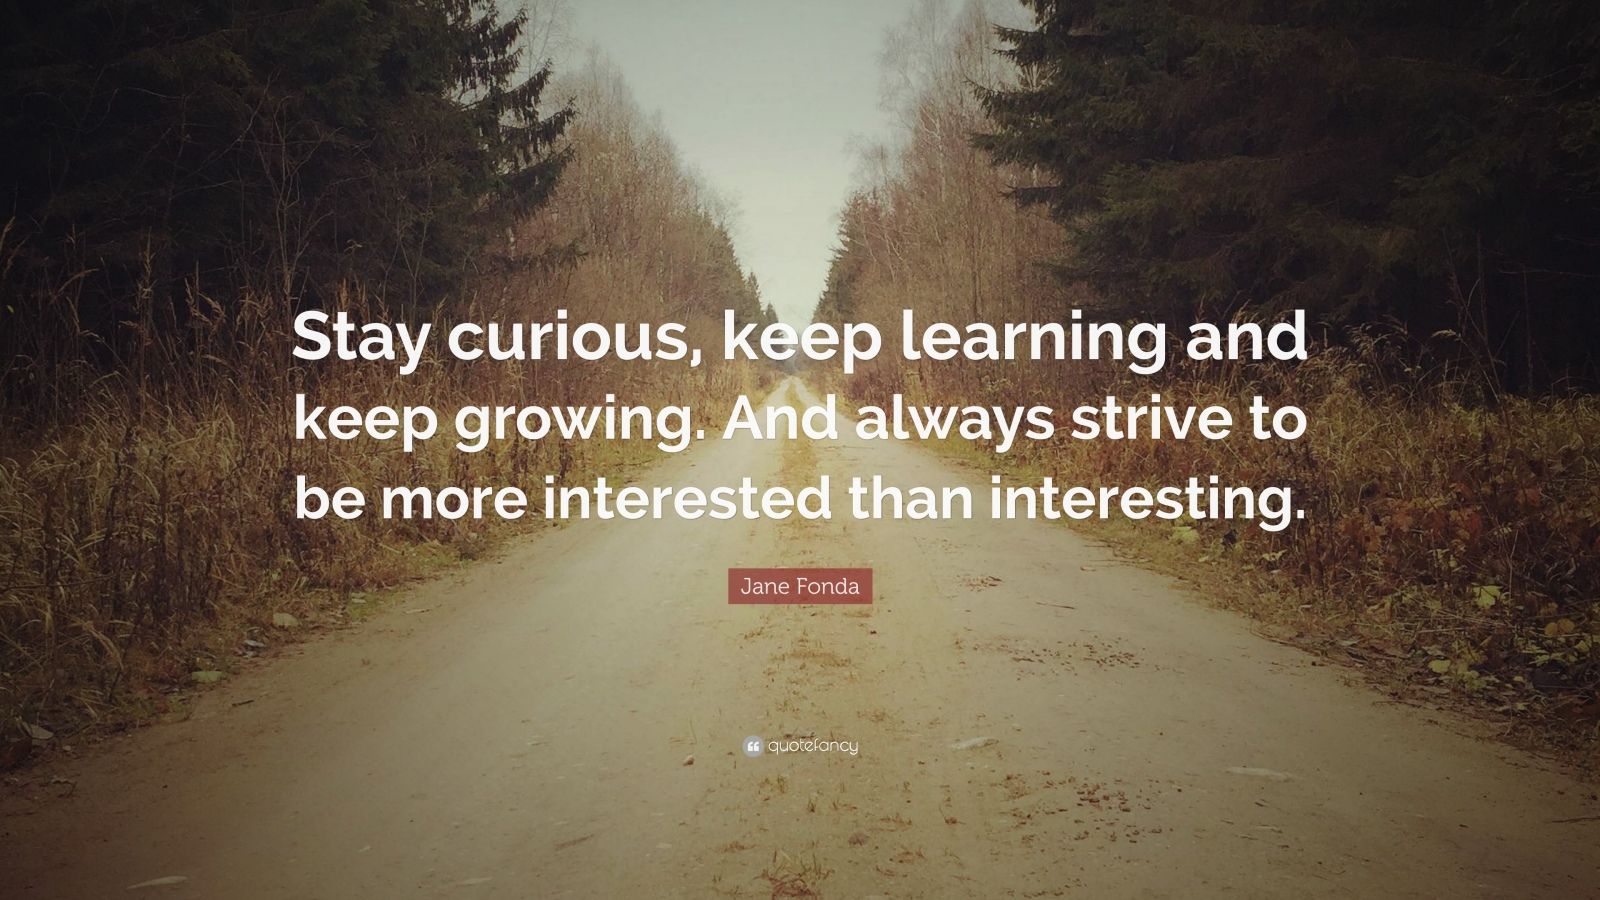 Jane Fonda Quote: “Stay curious, keep learning and keep growing. And